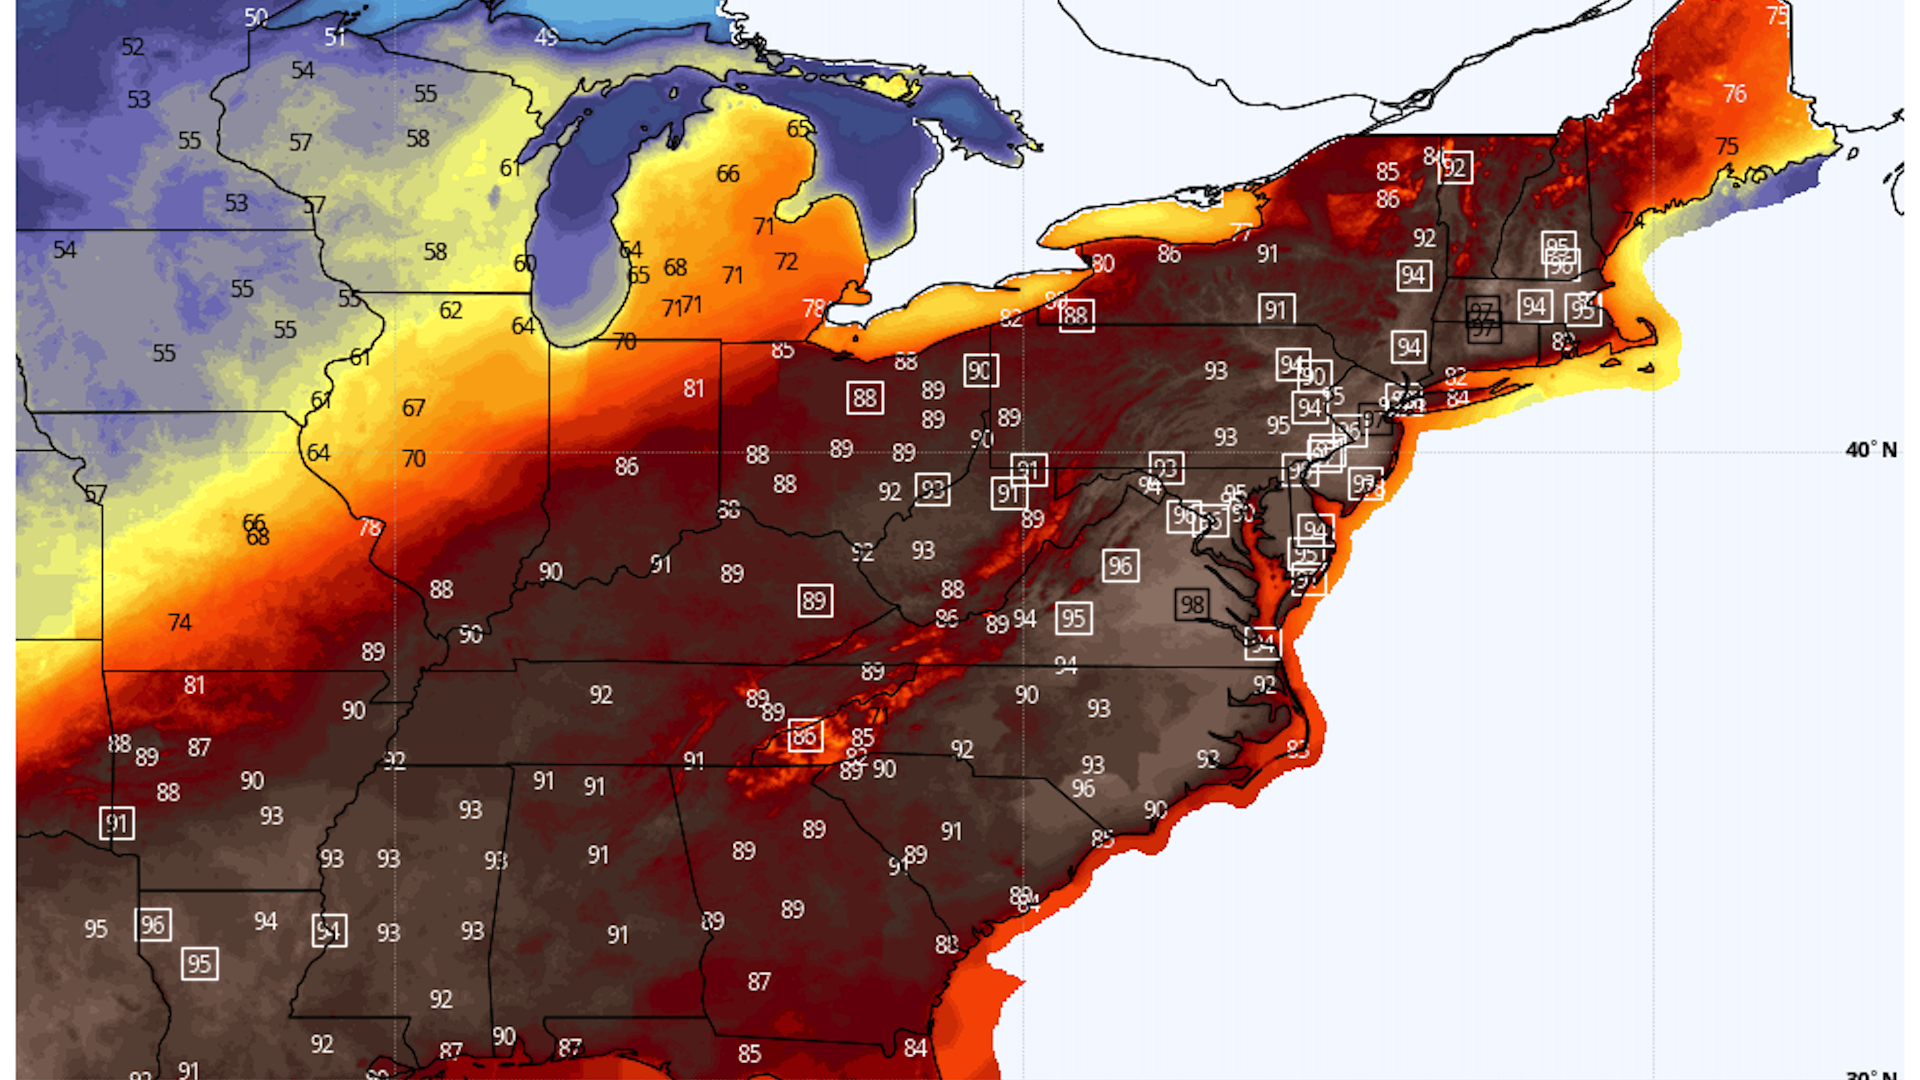 Computer model depiction of forecast highs and records along the East Coast for May 21, 2022.